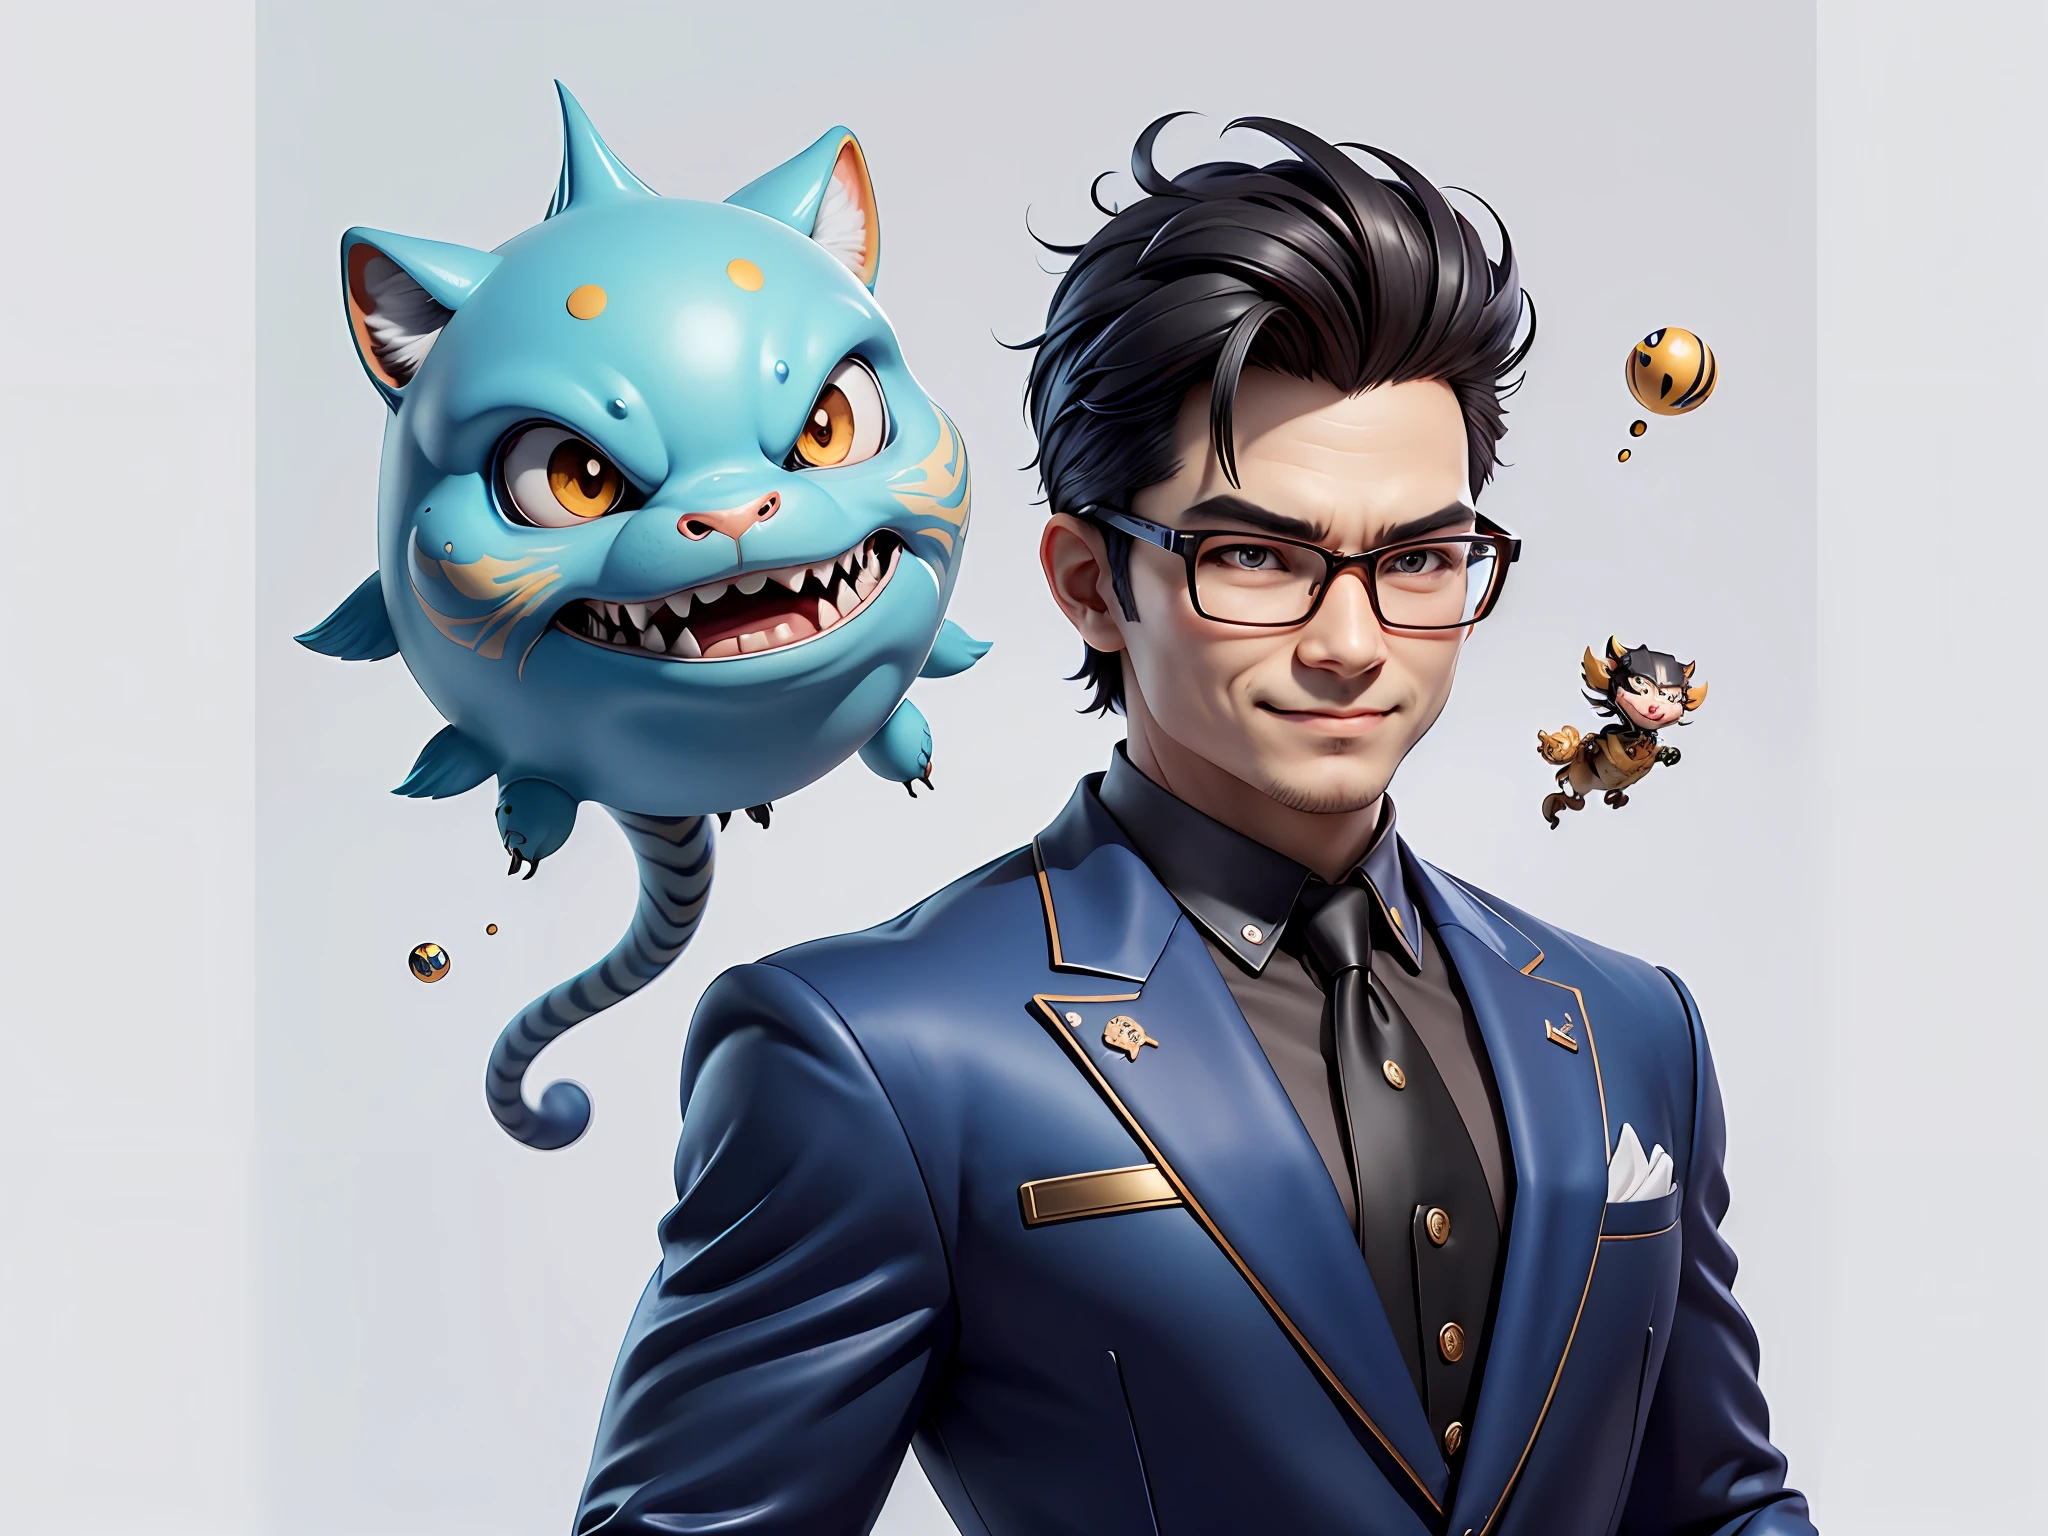 (Masterpiece), (Extreme Quality), (Super Meticulous), (Full Body: 1.2), Super Young Man, Chinese Dragon, Tiger, Wind God Thor, Sexy, Bursting, Oriental Face, TV Anchor, Bust Portrait Illustration, Black Formal Suit, Blue Tie, Slightly Chubby Face, Silver Glasses, Very Clean Face, No Beard on Chin, Black Super Short Hair, Black Eyes, Confident Smile, 3c Computer Sub-Products, iPad, iPhone, Digital Painting, 3D Character Design by Mark Claireden and Pixar and Hayao Miyazaki and Akira Toriyama, The illustration is a high-definition illustration in 4K resolution with very detailed facial features and cartoon-style visuals.